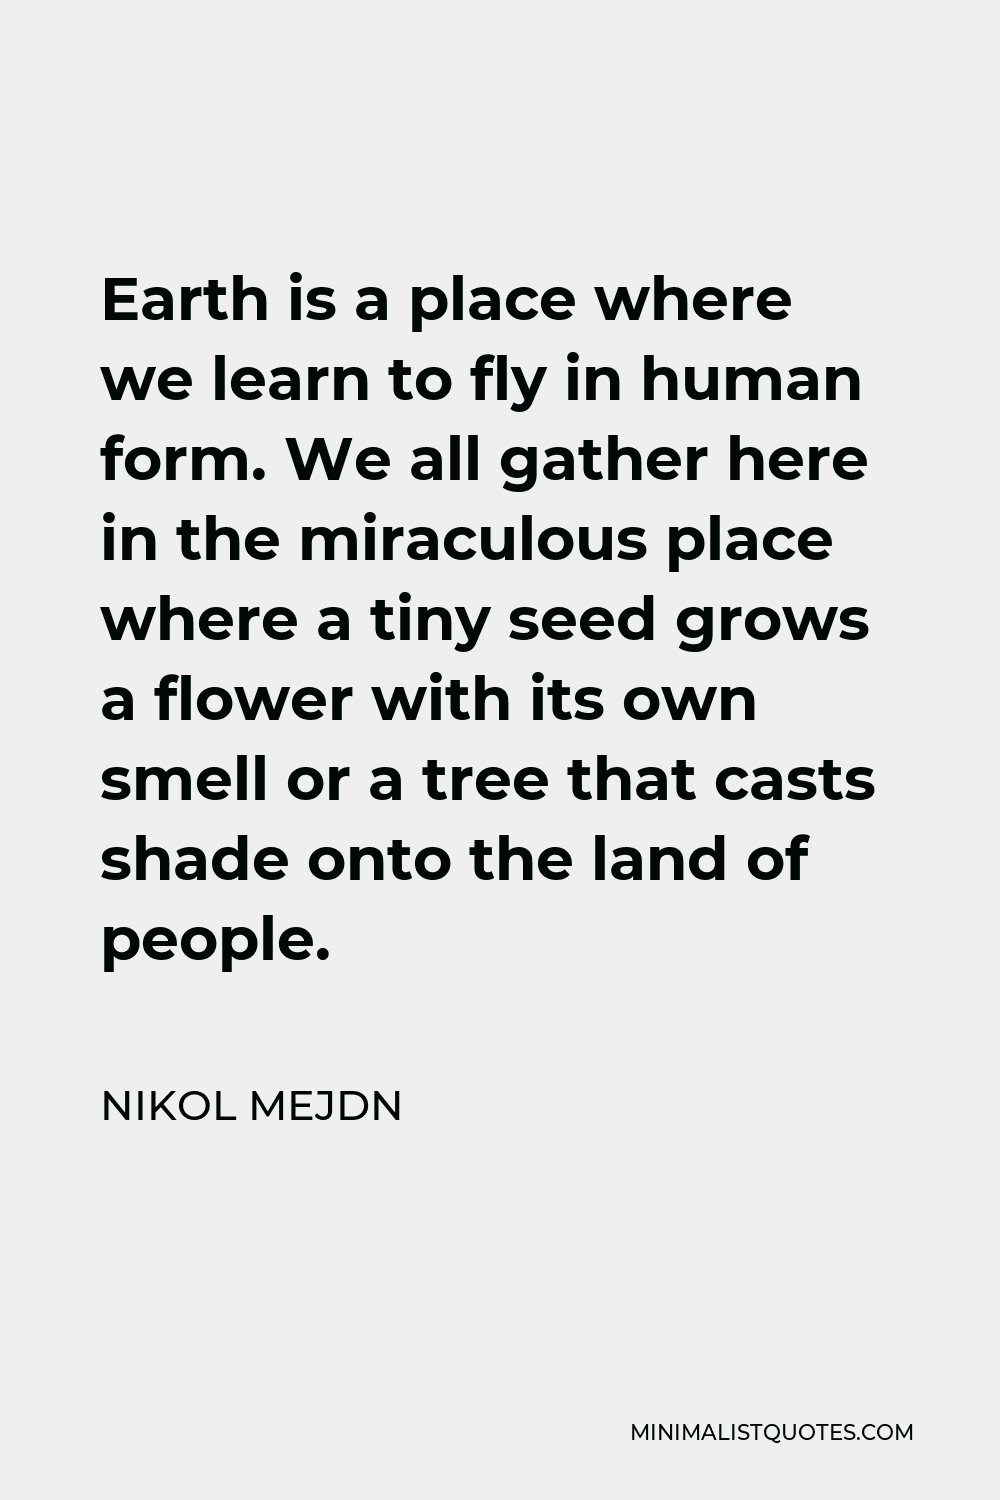 Nikol Mejdn Quote - Earth is a place where we learn to fly in human form. We all gather here in the miraculous place where a tiny seed grows a flower with its own smell or a tree that casts shade onto the land of people.